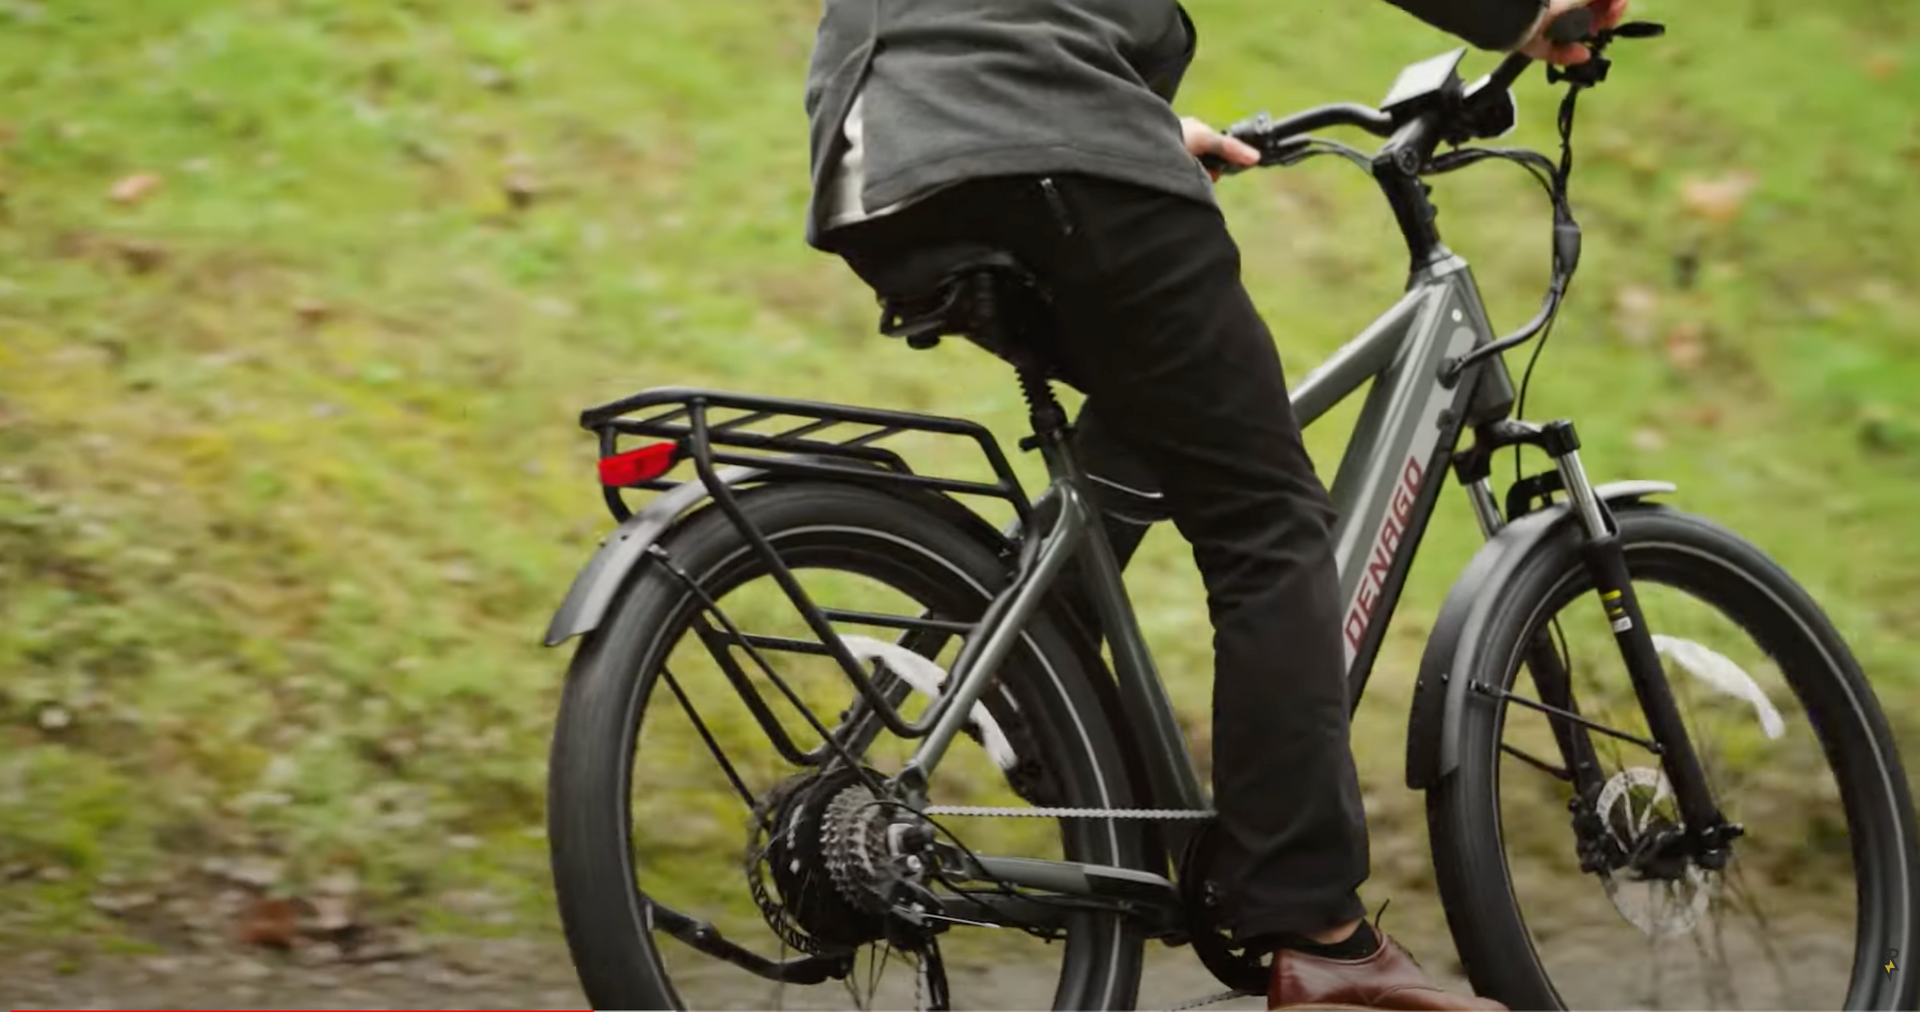 Load video: Electrified Reviews on the Denago Commute Model 1